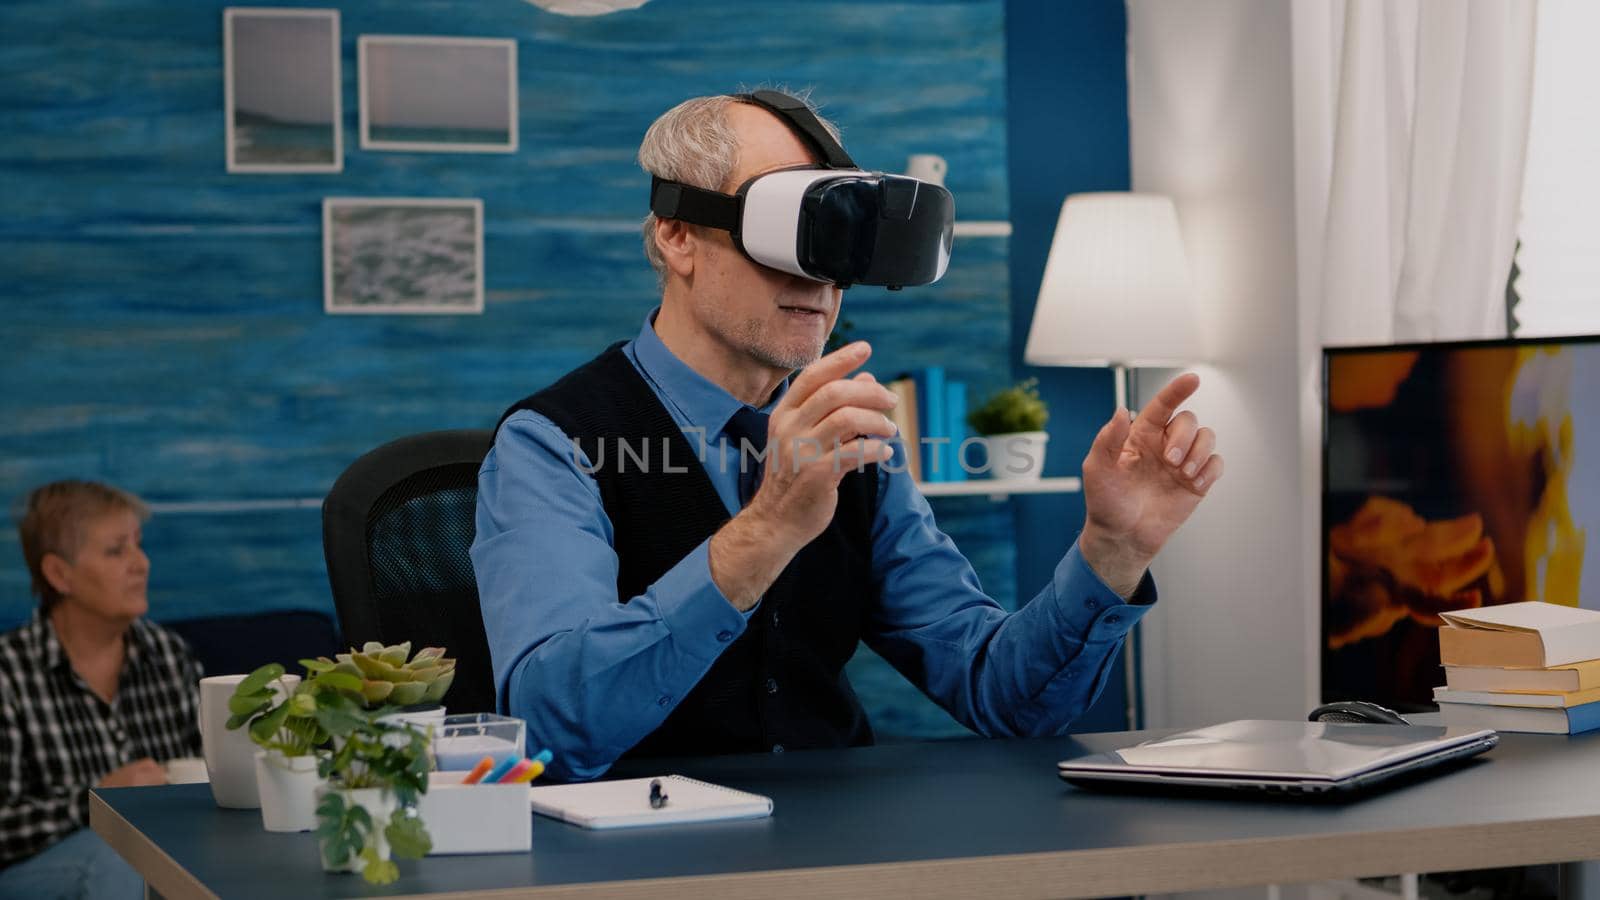 Retired man experiencing virtual reality using vr headset in living room working from home. Old remote employee searching, analysing financial reports while elderly wife watching tv in background